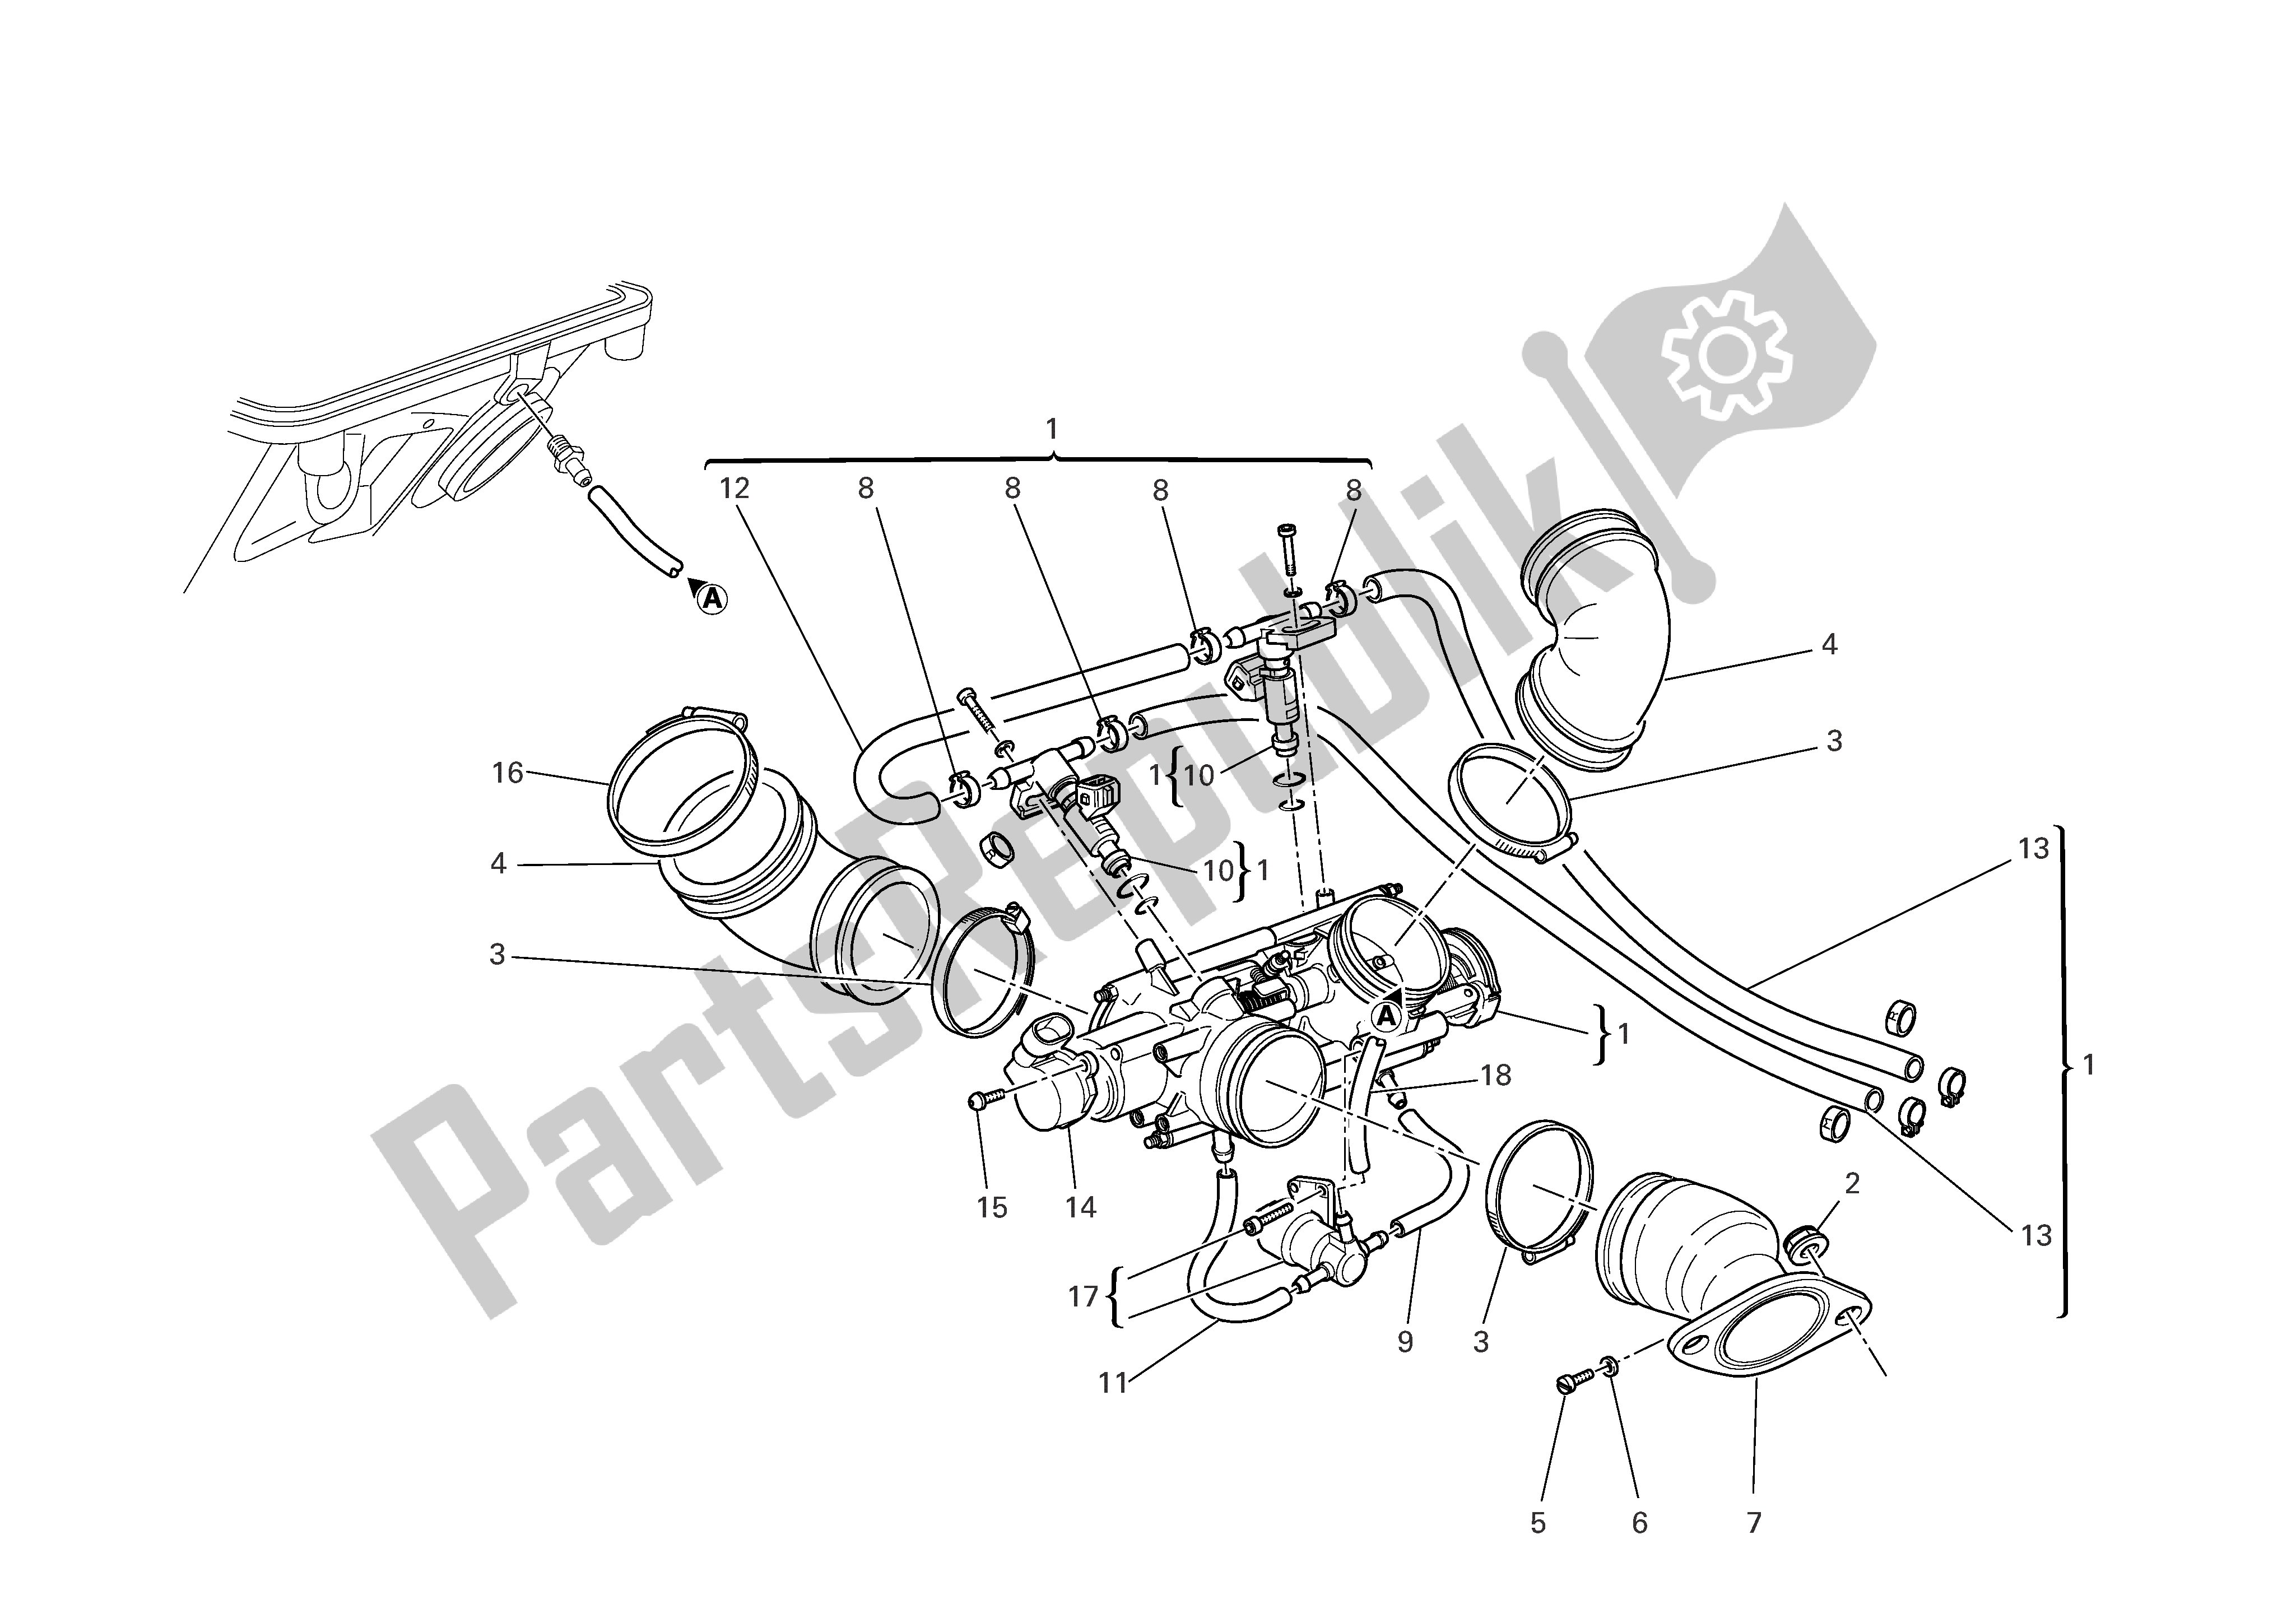 All parts for the Intake Manifolds of the Ducati Multistrada 1000 2006